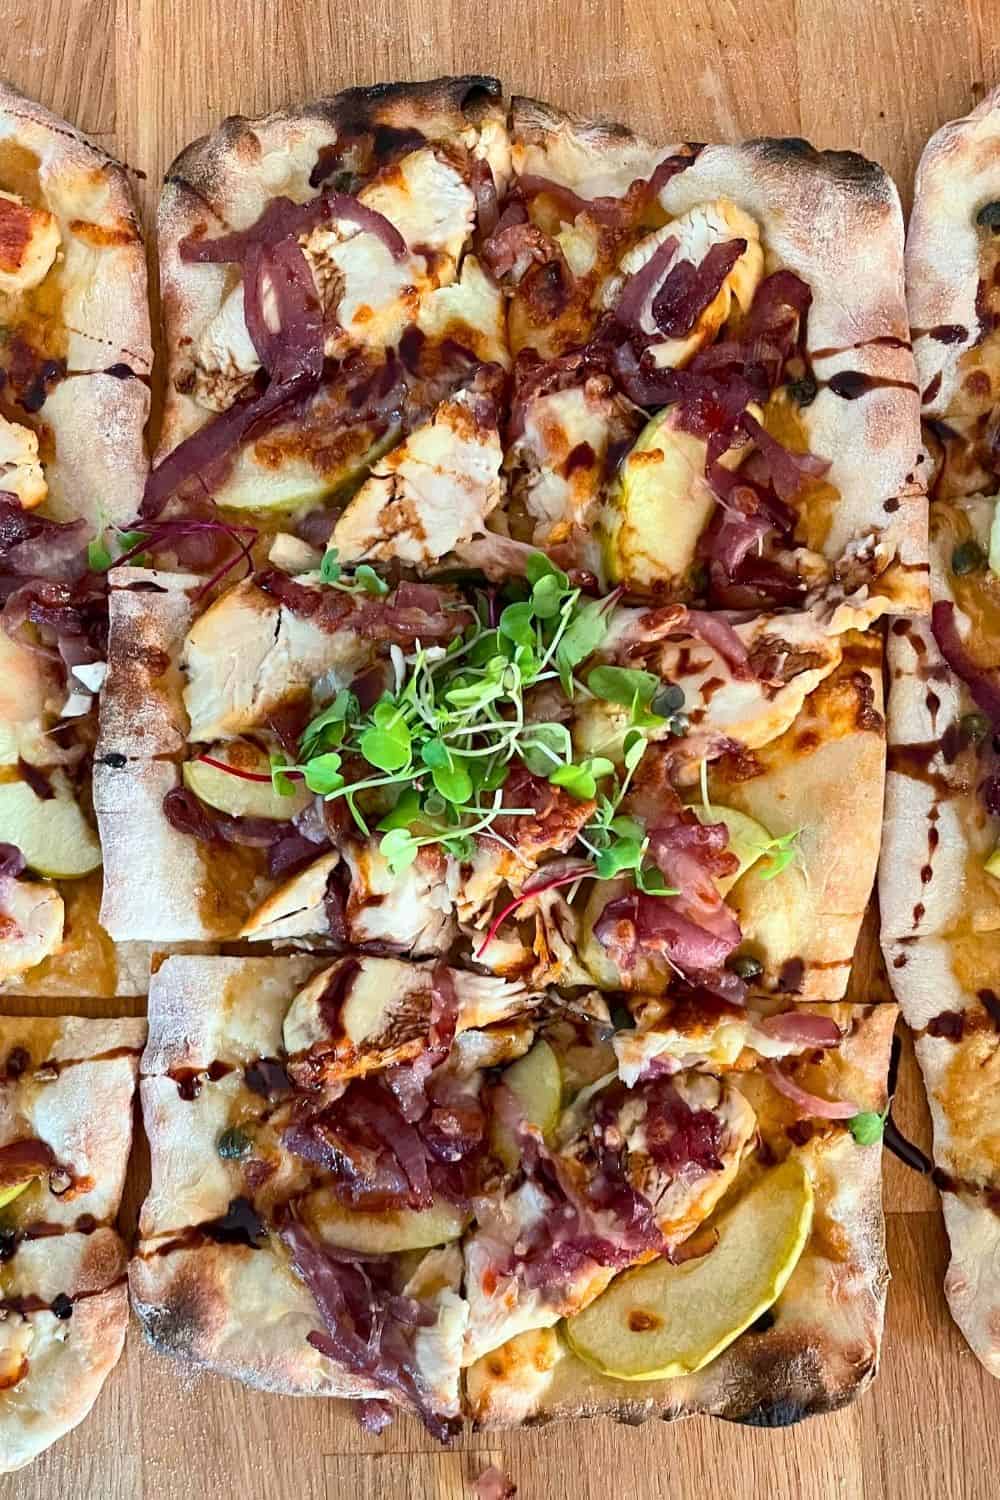 Chicken Flatbread Recipe with Balsamic Glaze, Apples, and Caramelized Onions